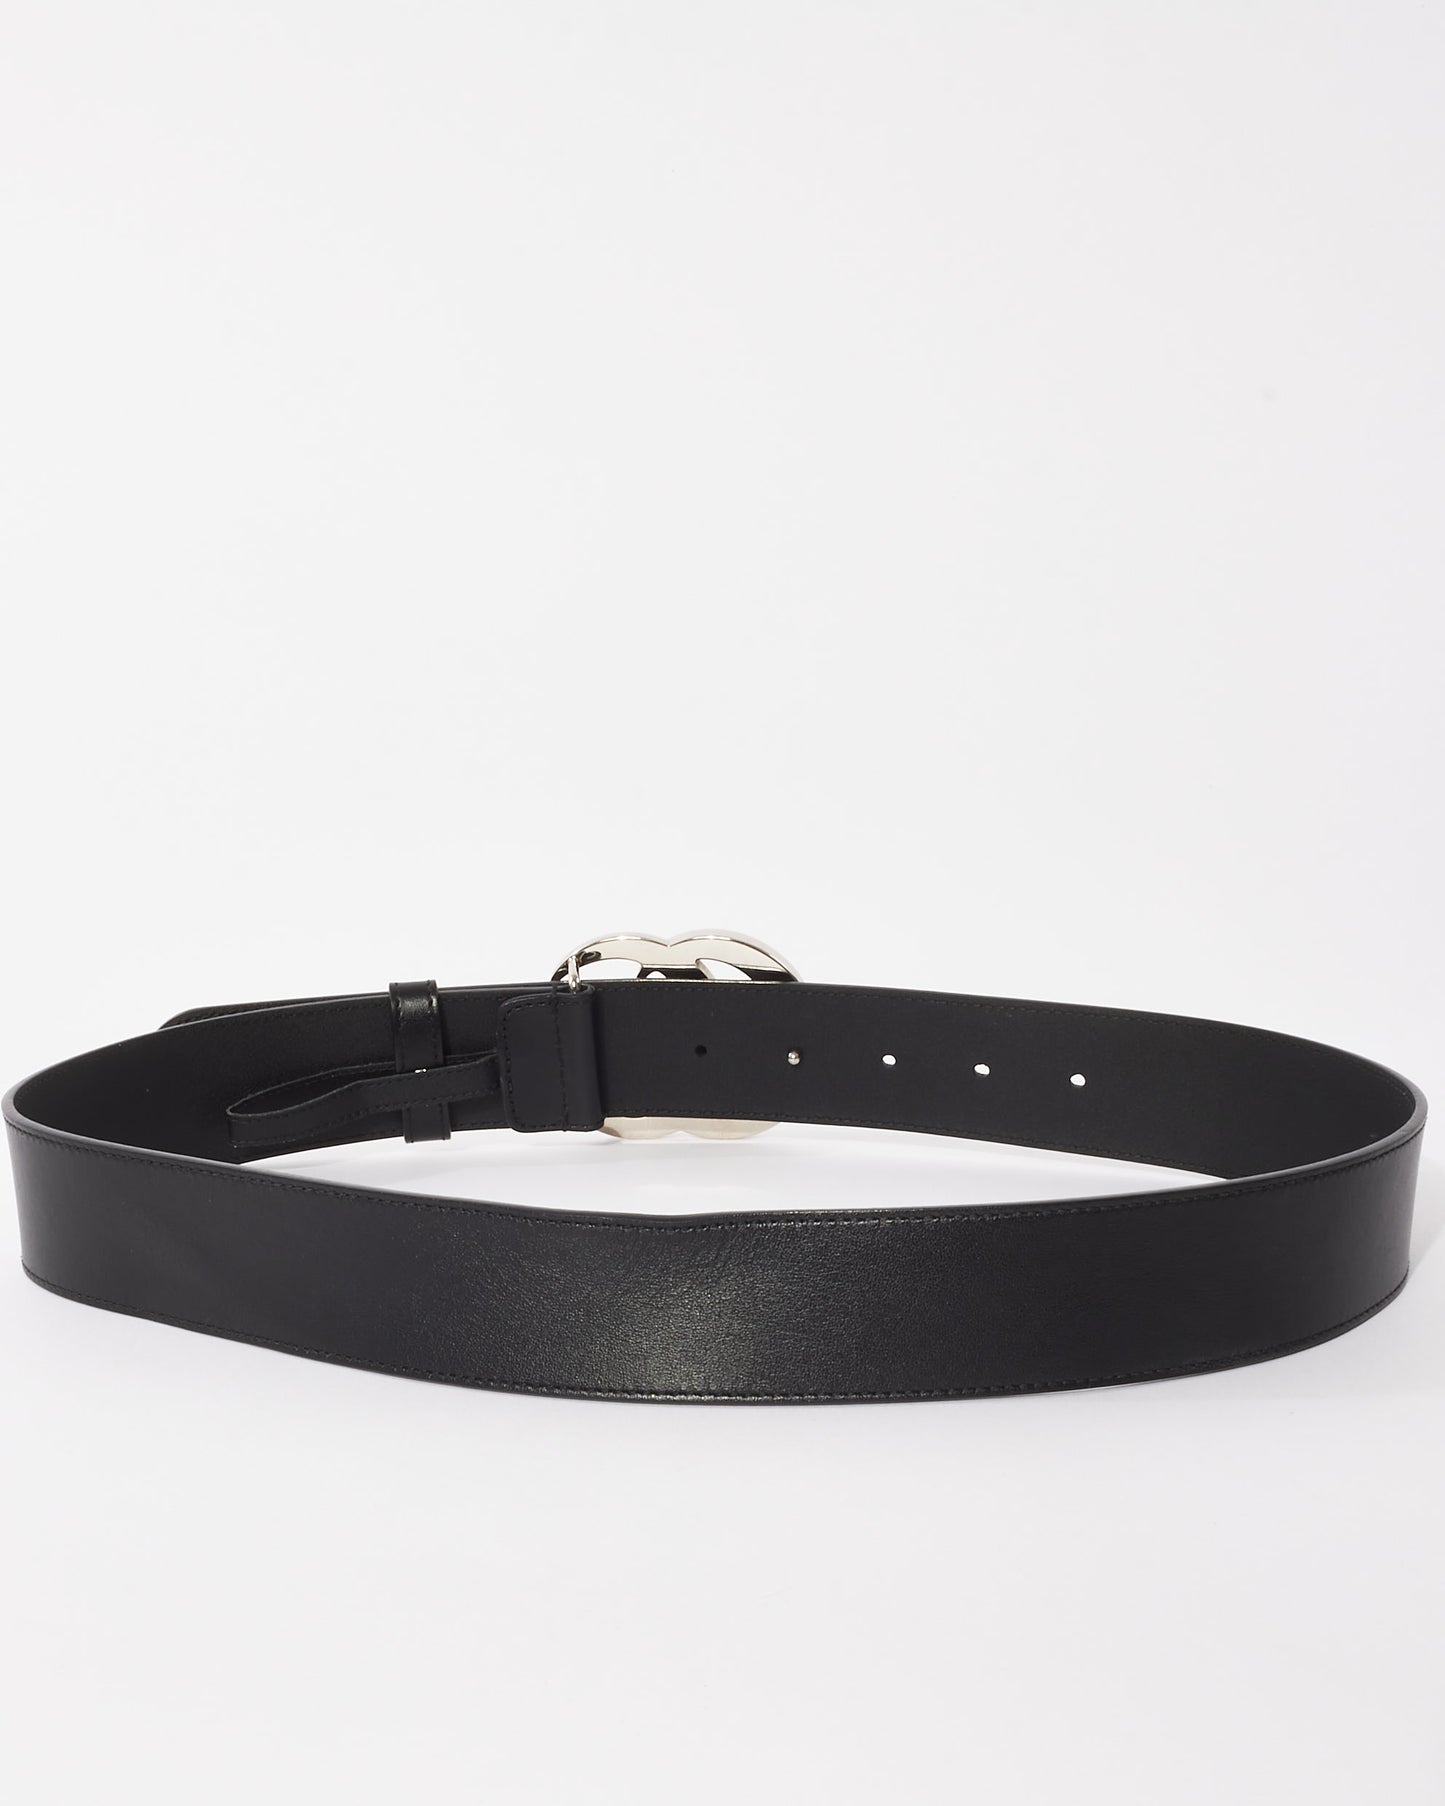 Gucci Black Leather & Silver GG Marmont Belt - 80/32